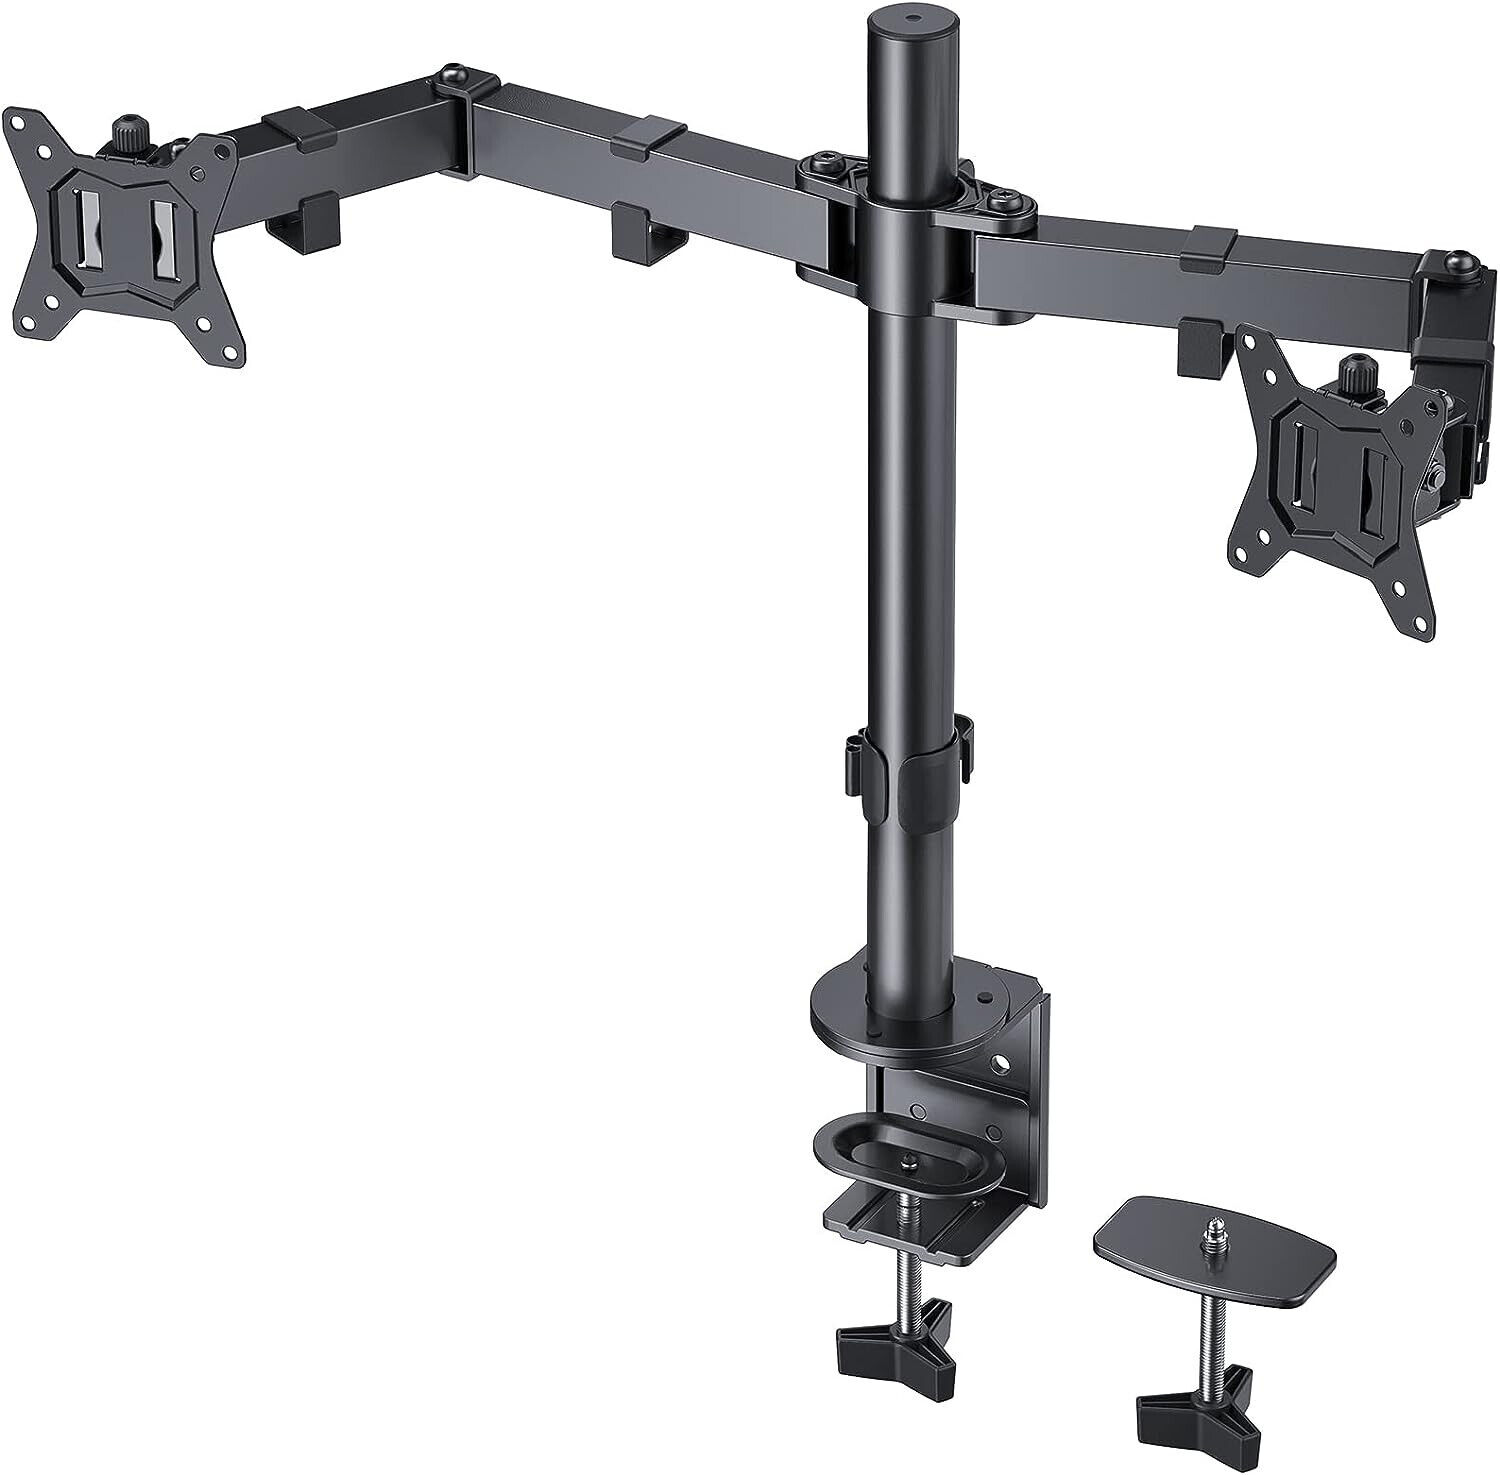 Irongear Dual Monitor Stand for 17-32 inch Screens,Heavy Duty Fully Adjustable M